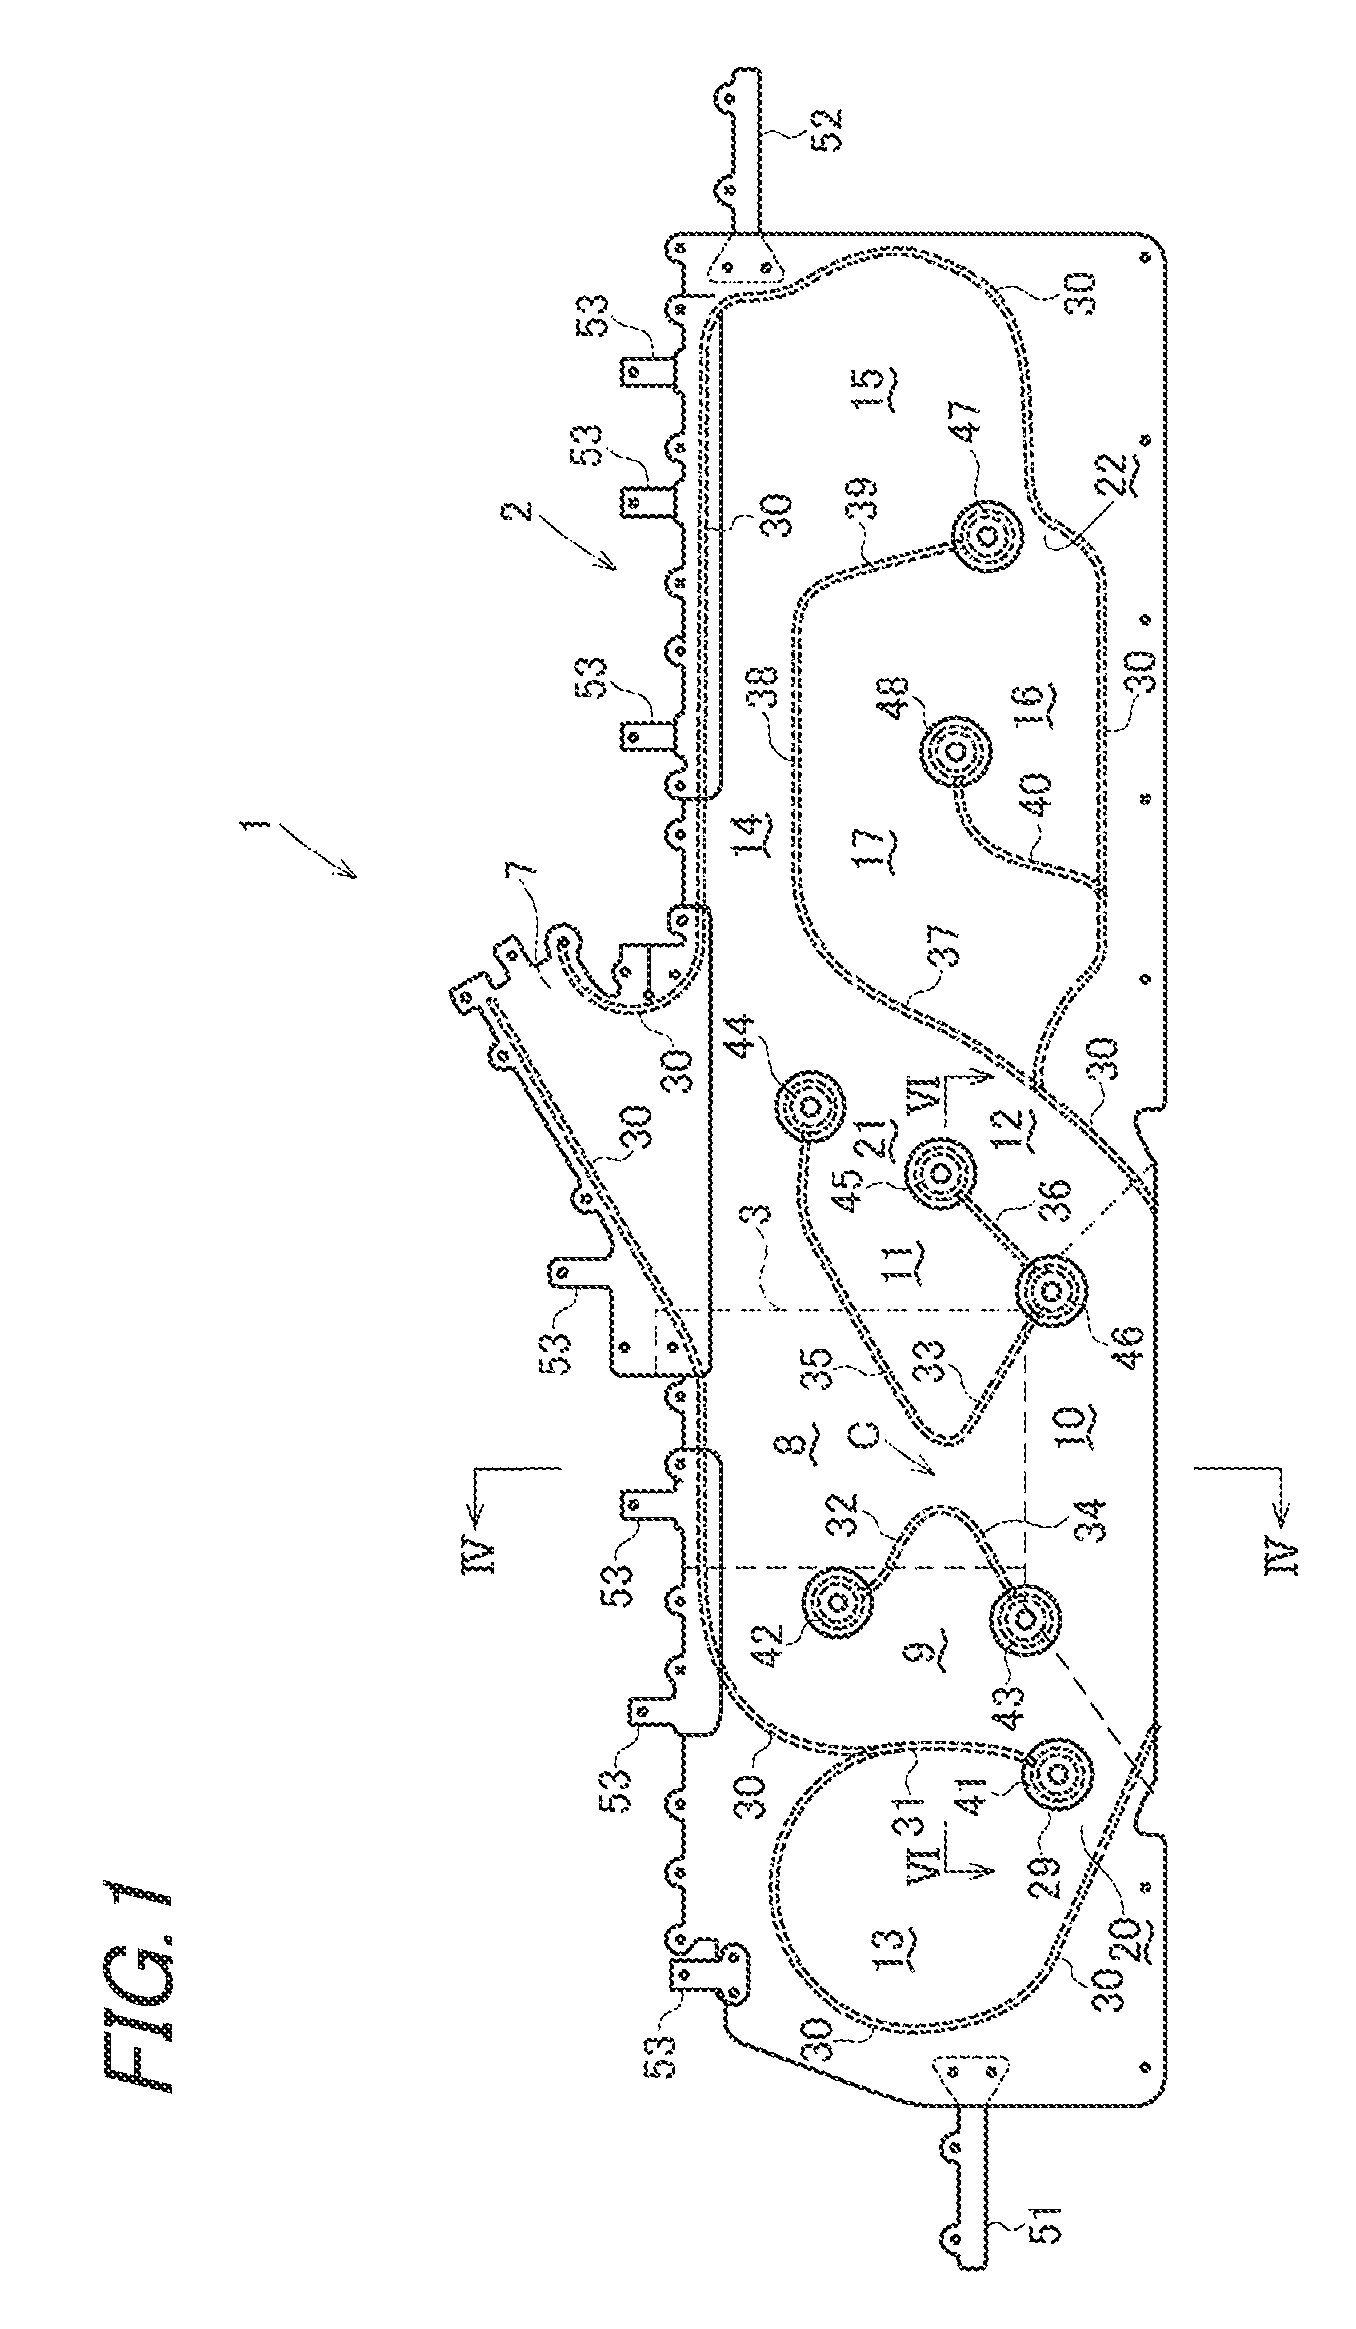 Curtain airbag and curtain airbag device